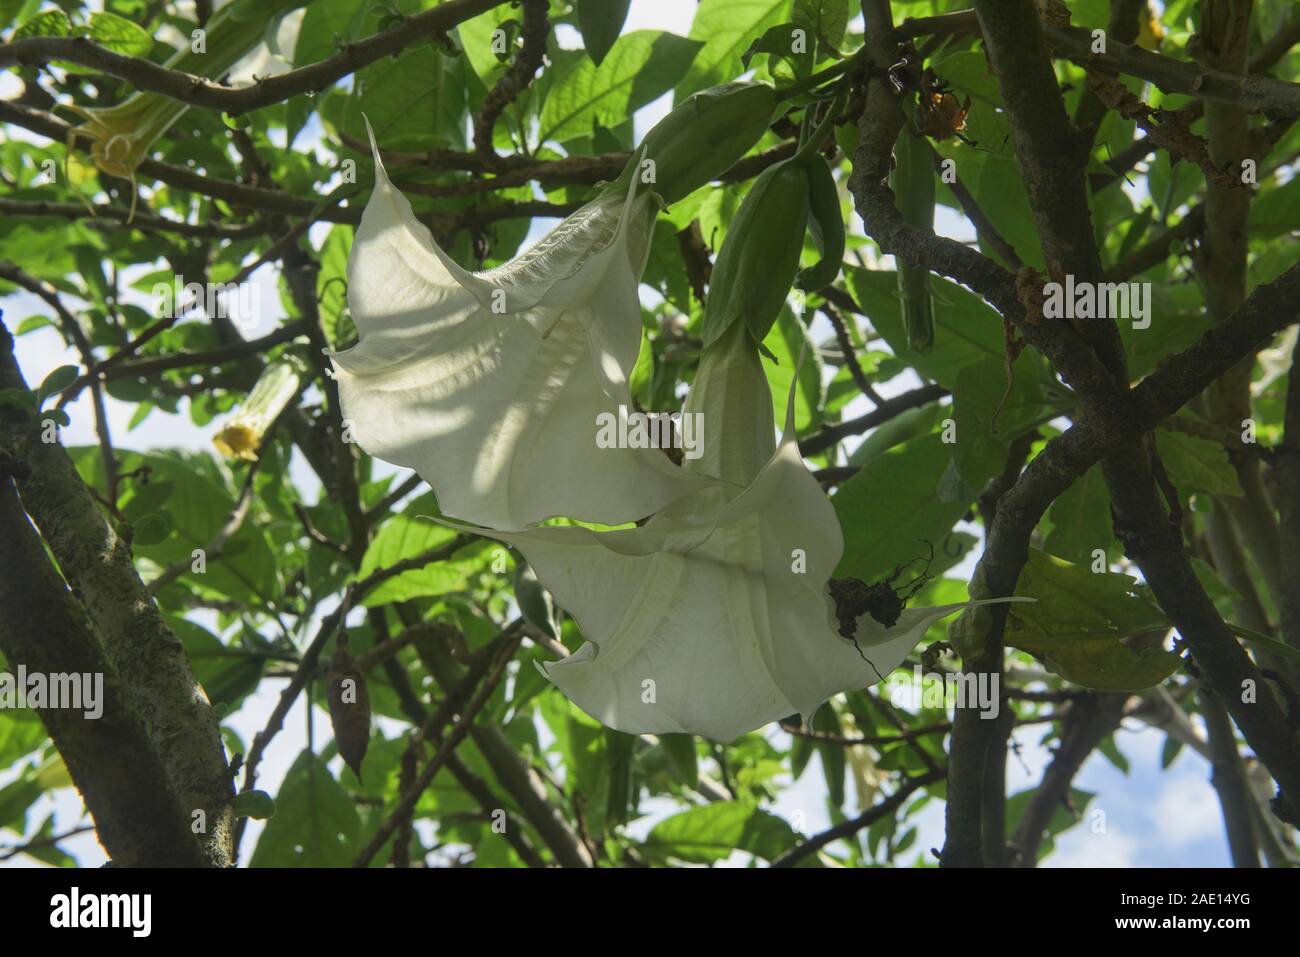 Angel's tears (Brugmansia candida) growing in the Quito Botanical Gardens, Quito, Ecuador Stock Photo